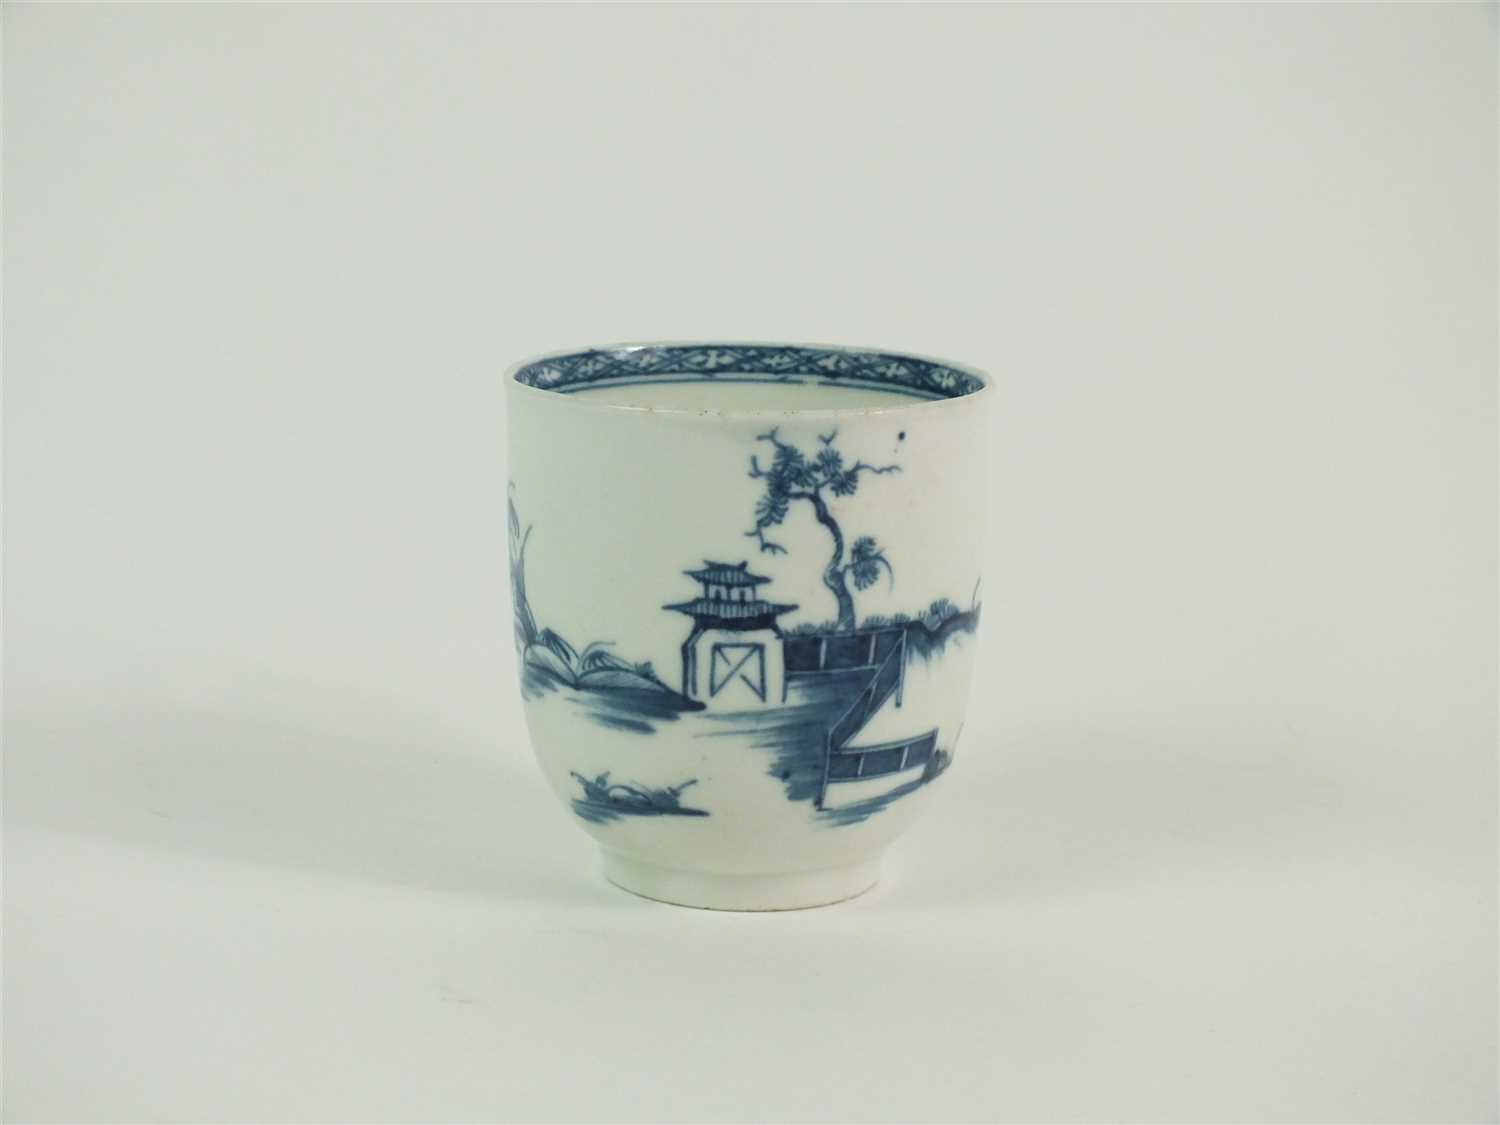 A rare Worcester porcelain blue and white chocolate cup - Image 2 of 4